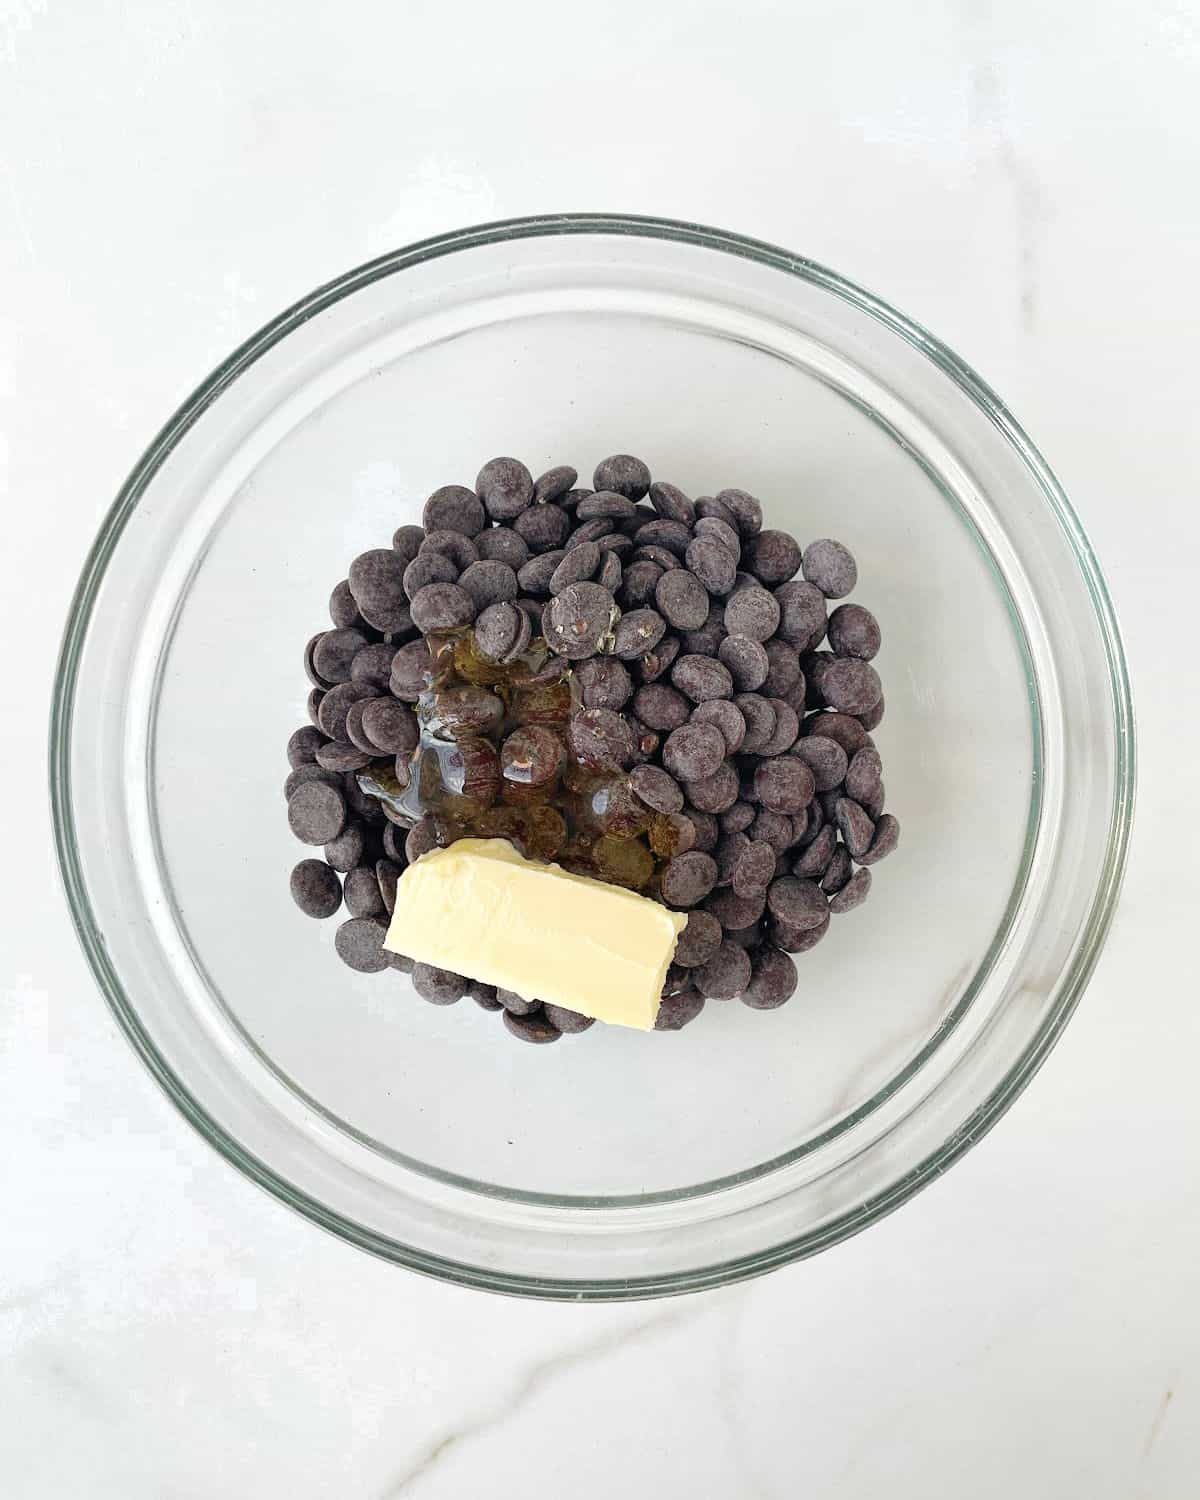 Chocolate chips and chunk of butter in a glass bowl on a white marble surface.